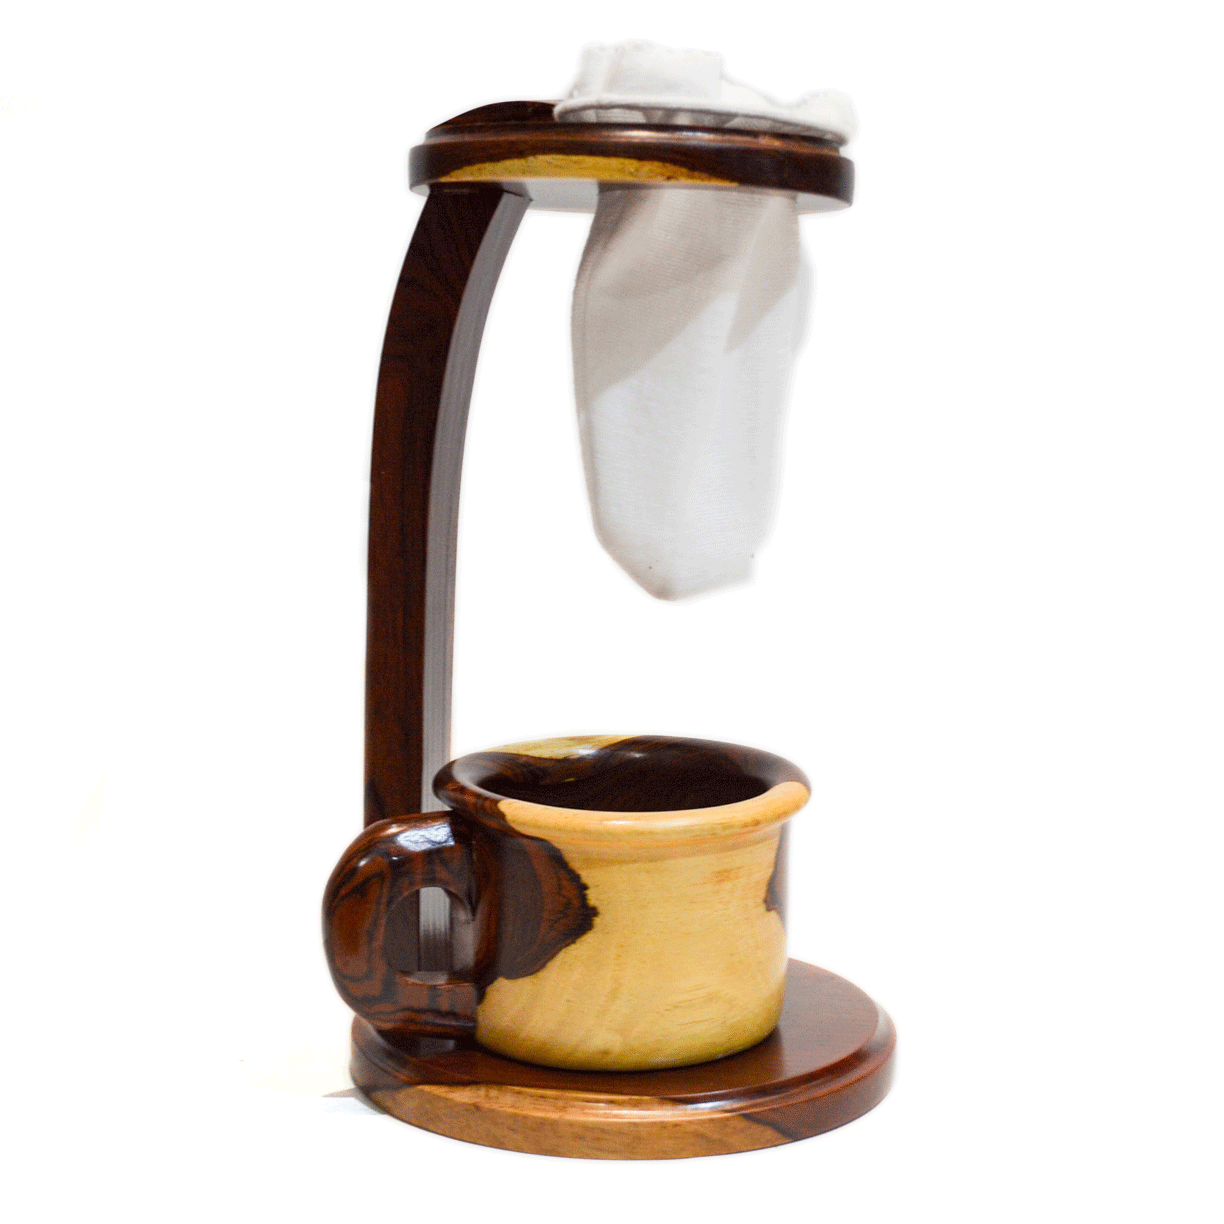 Wooden coffee brewer with mug and bag